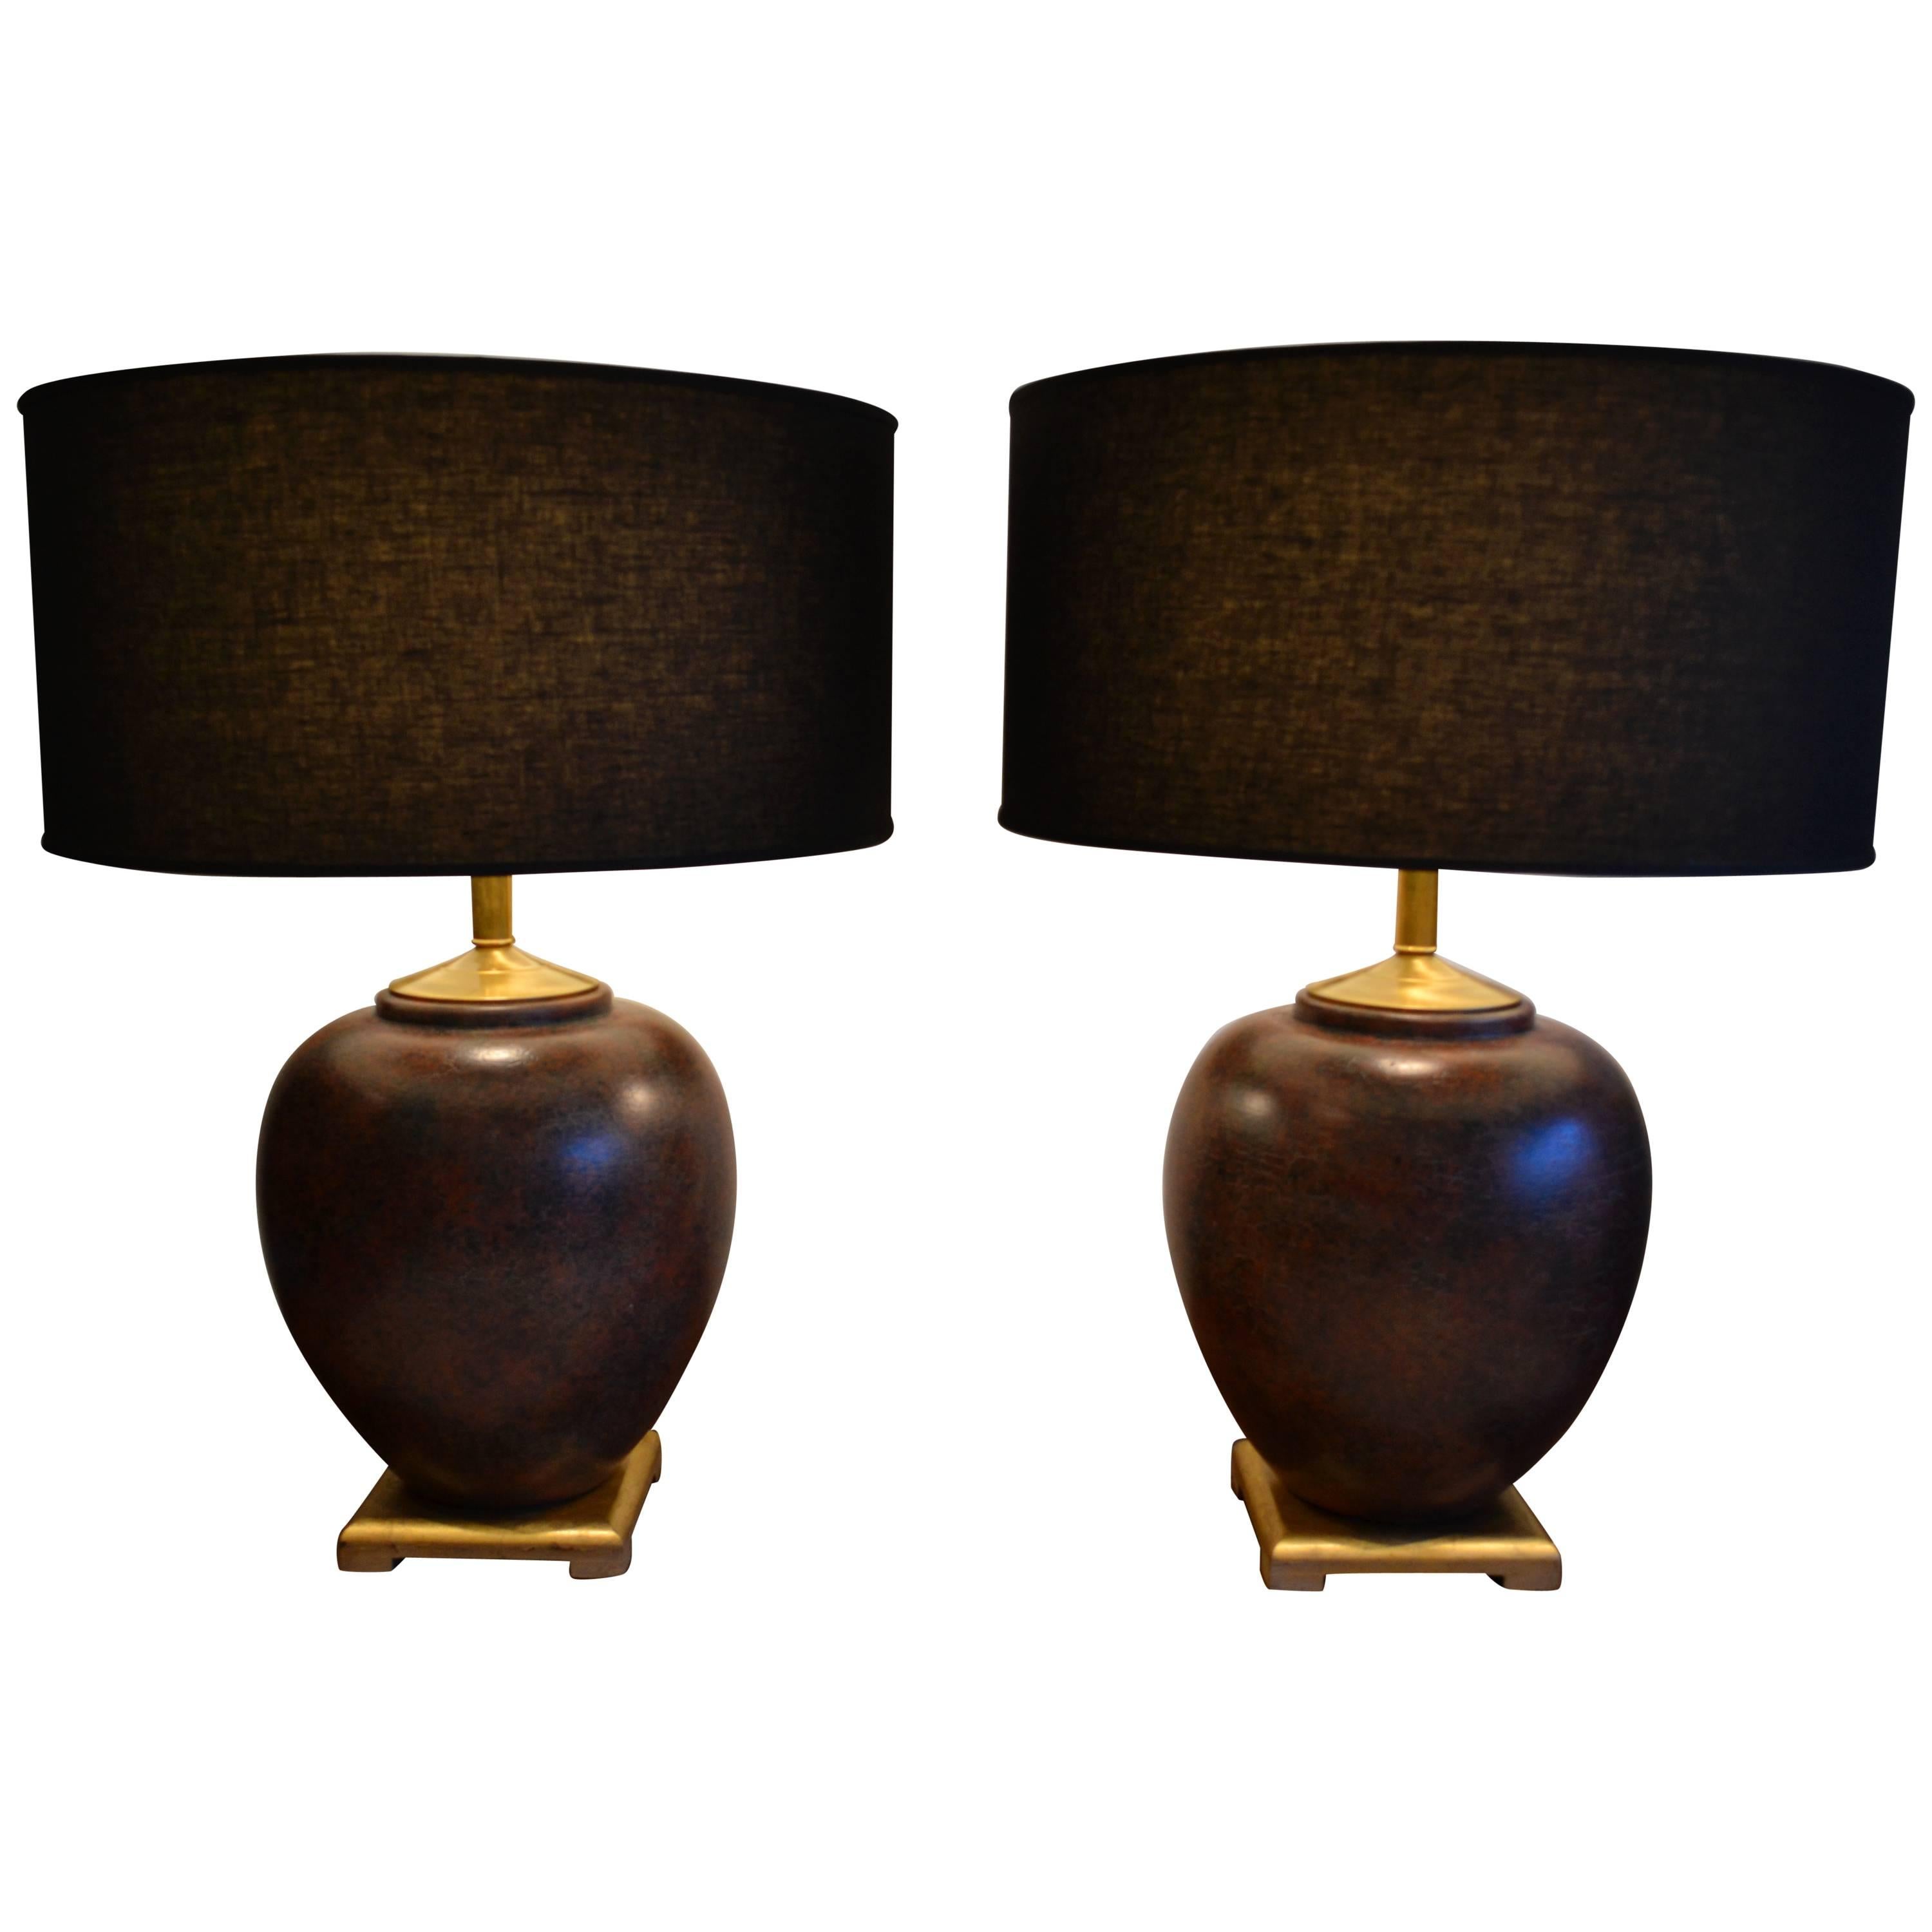 Pair of Huge Asian Ceramic Ginger Jar Table Lamps in the Style of James Mont